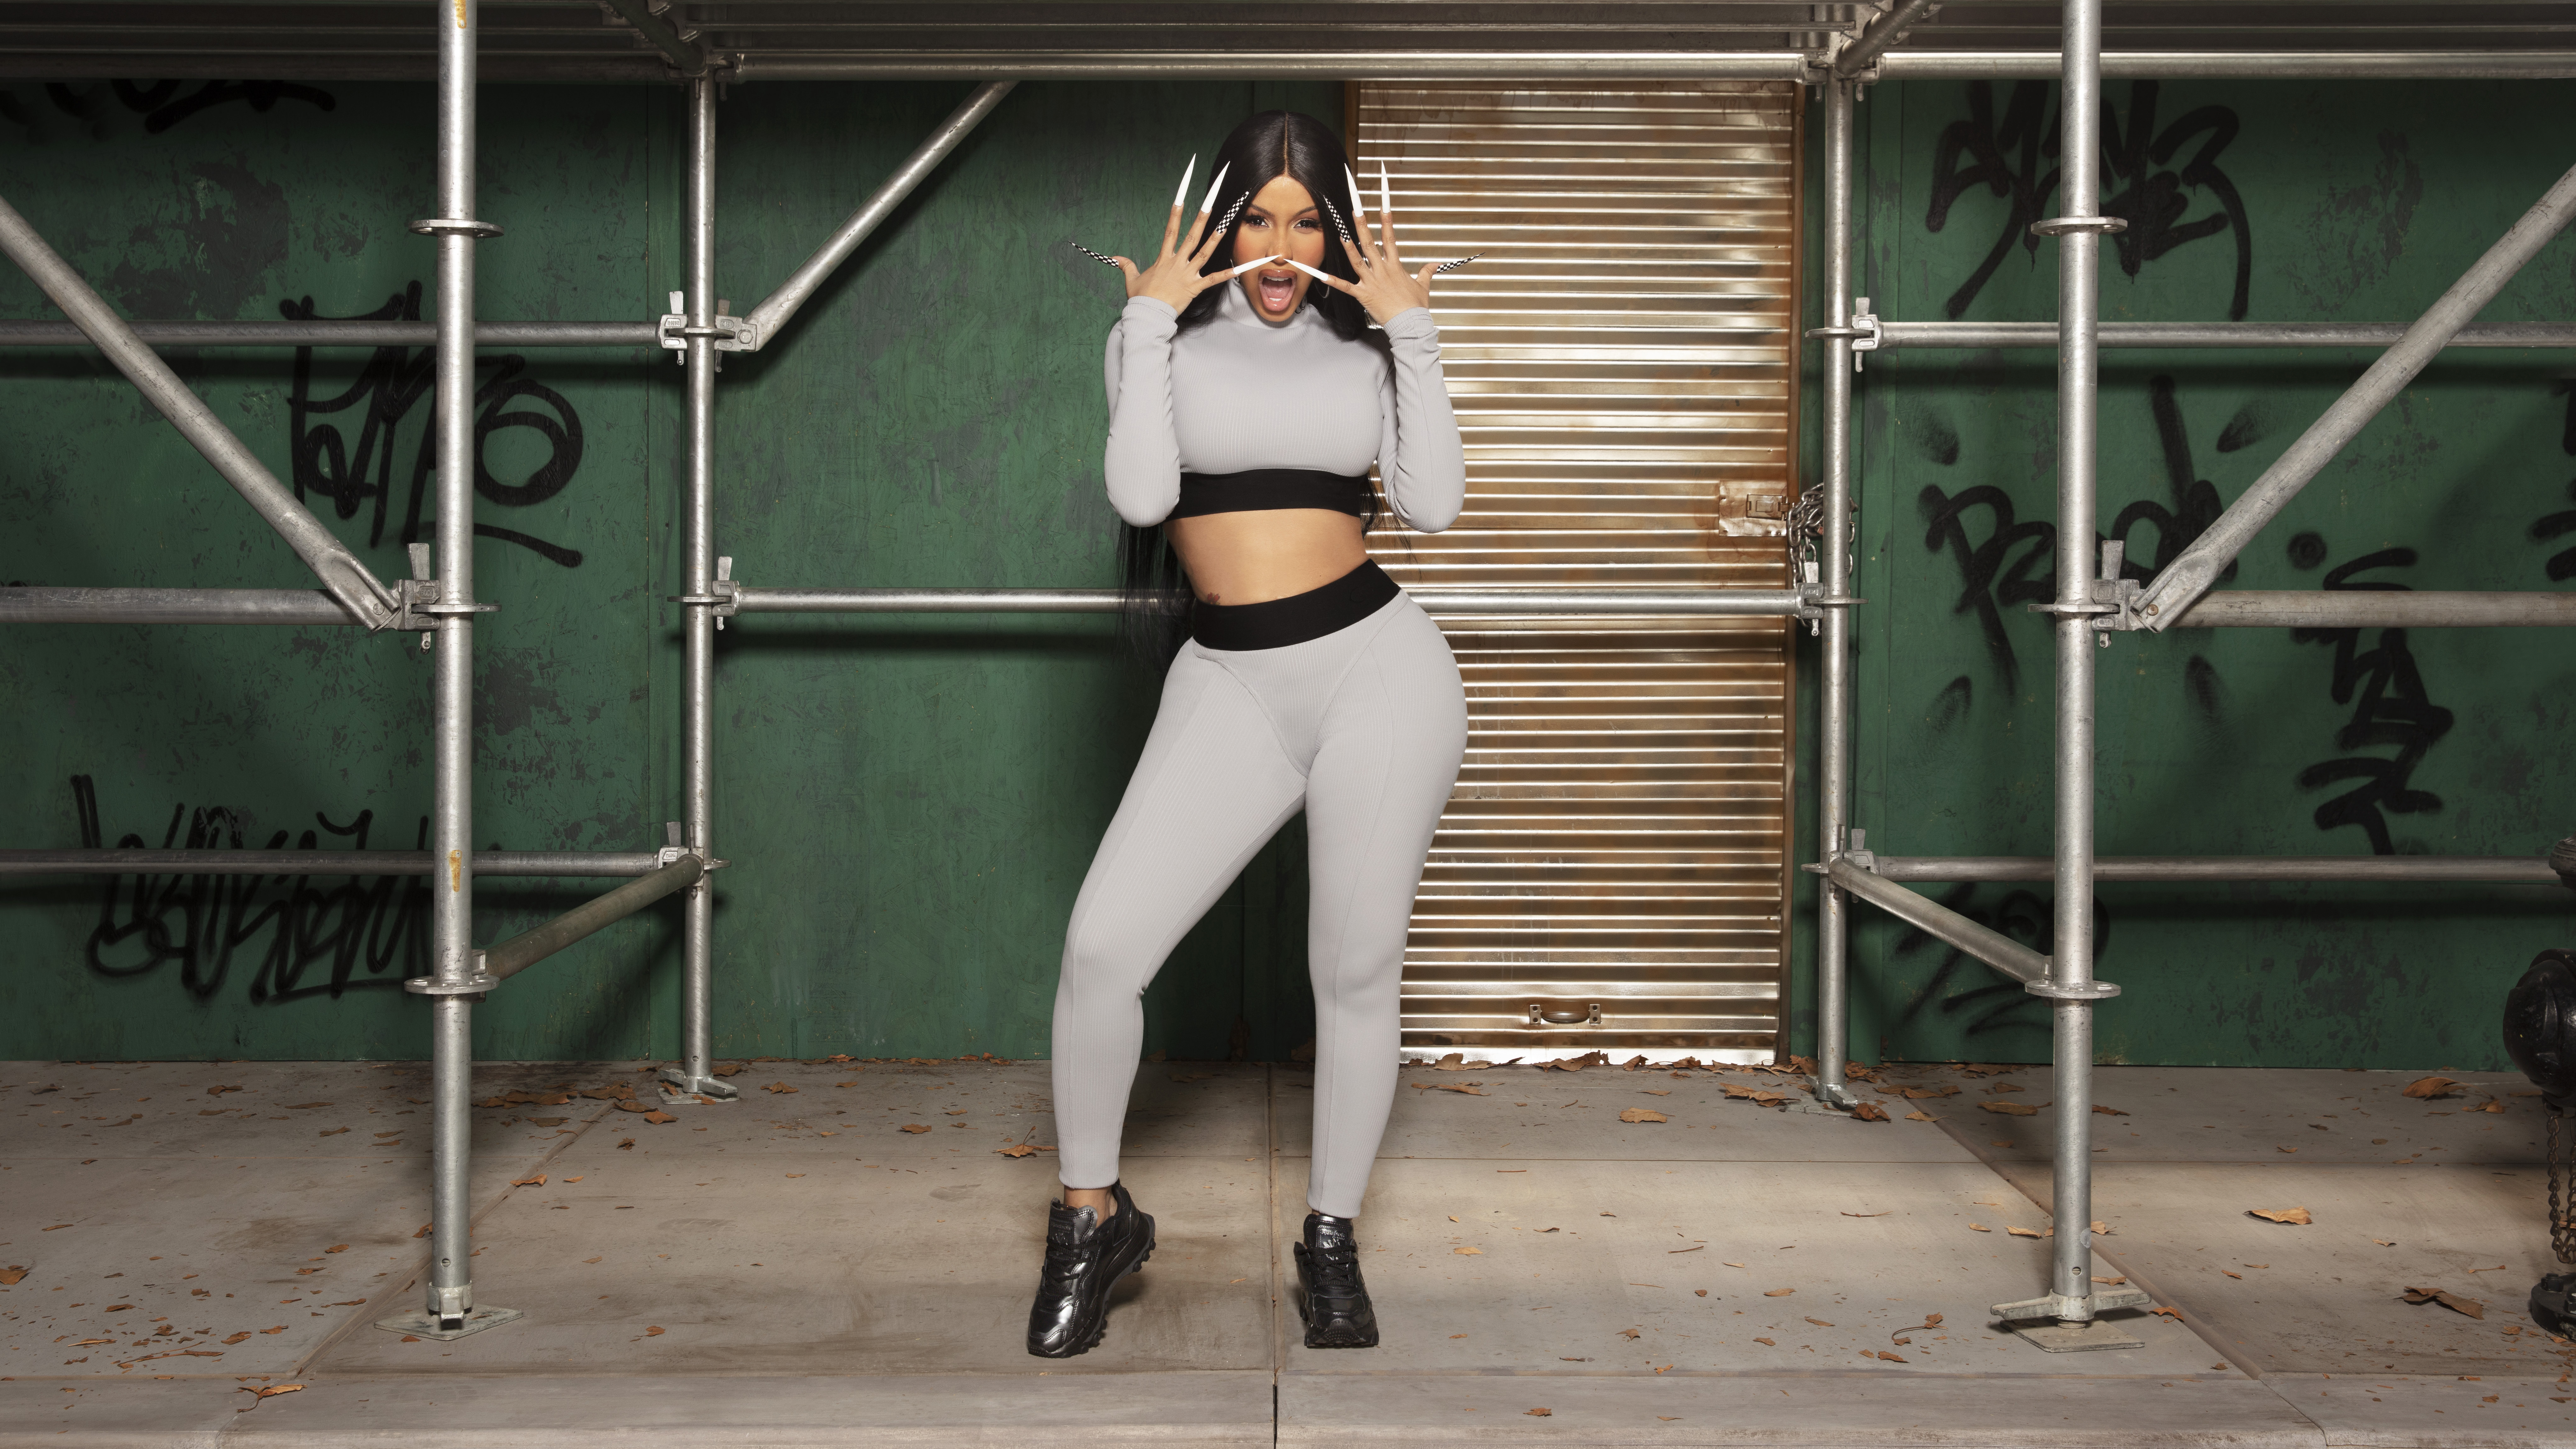 NYC Inspires Cardi B's New Reebok Collection | Complex